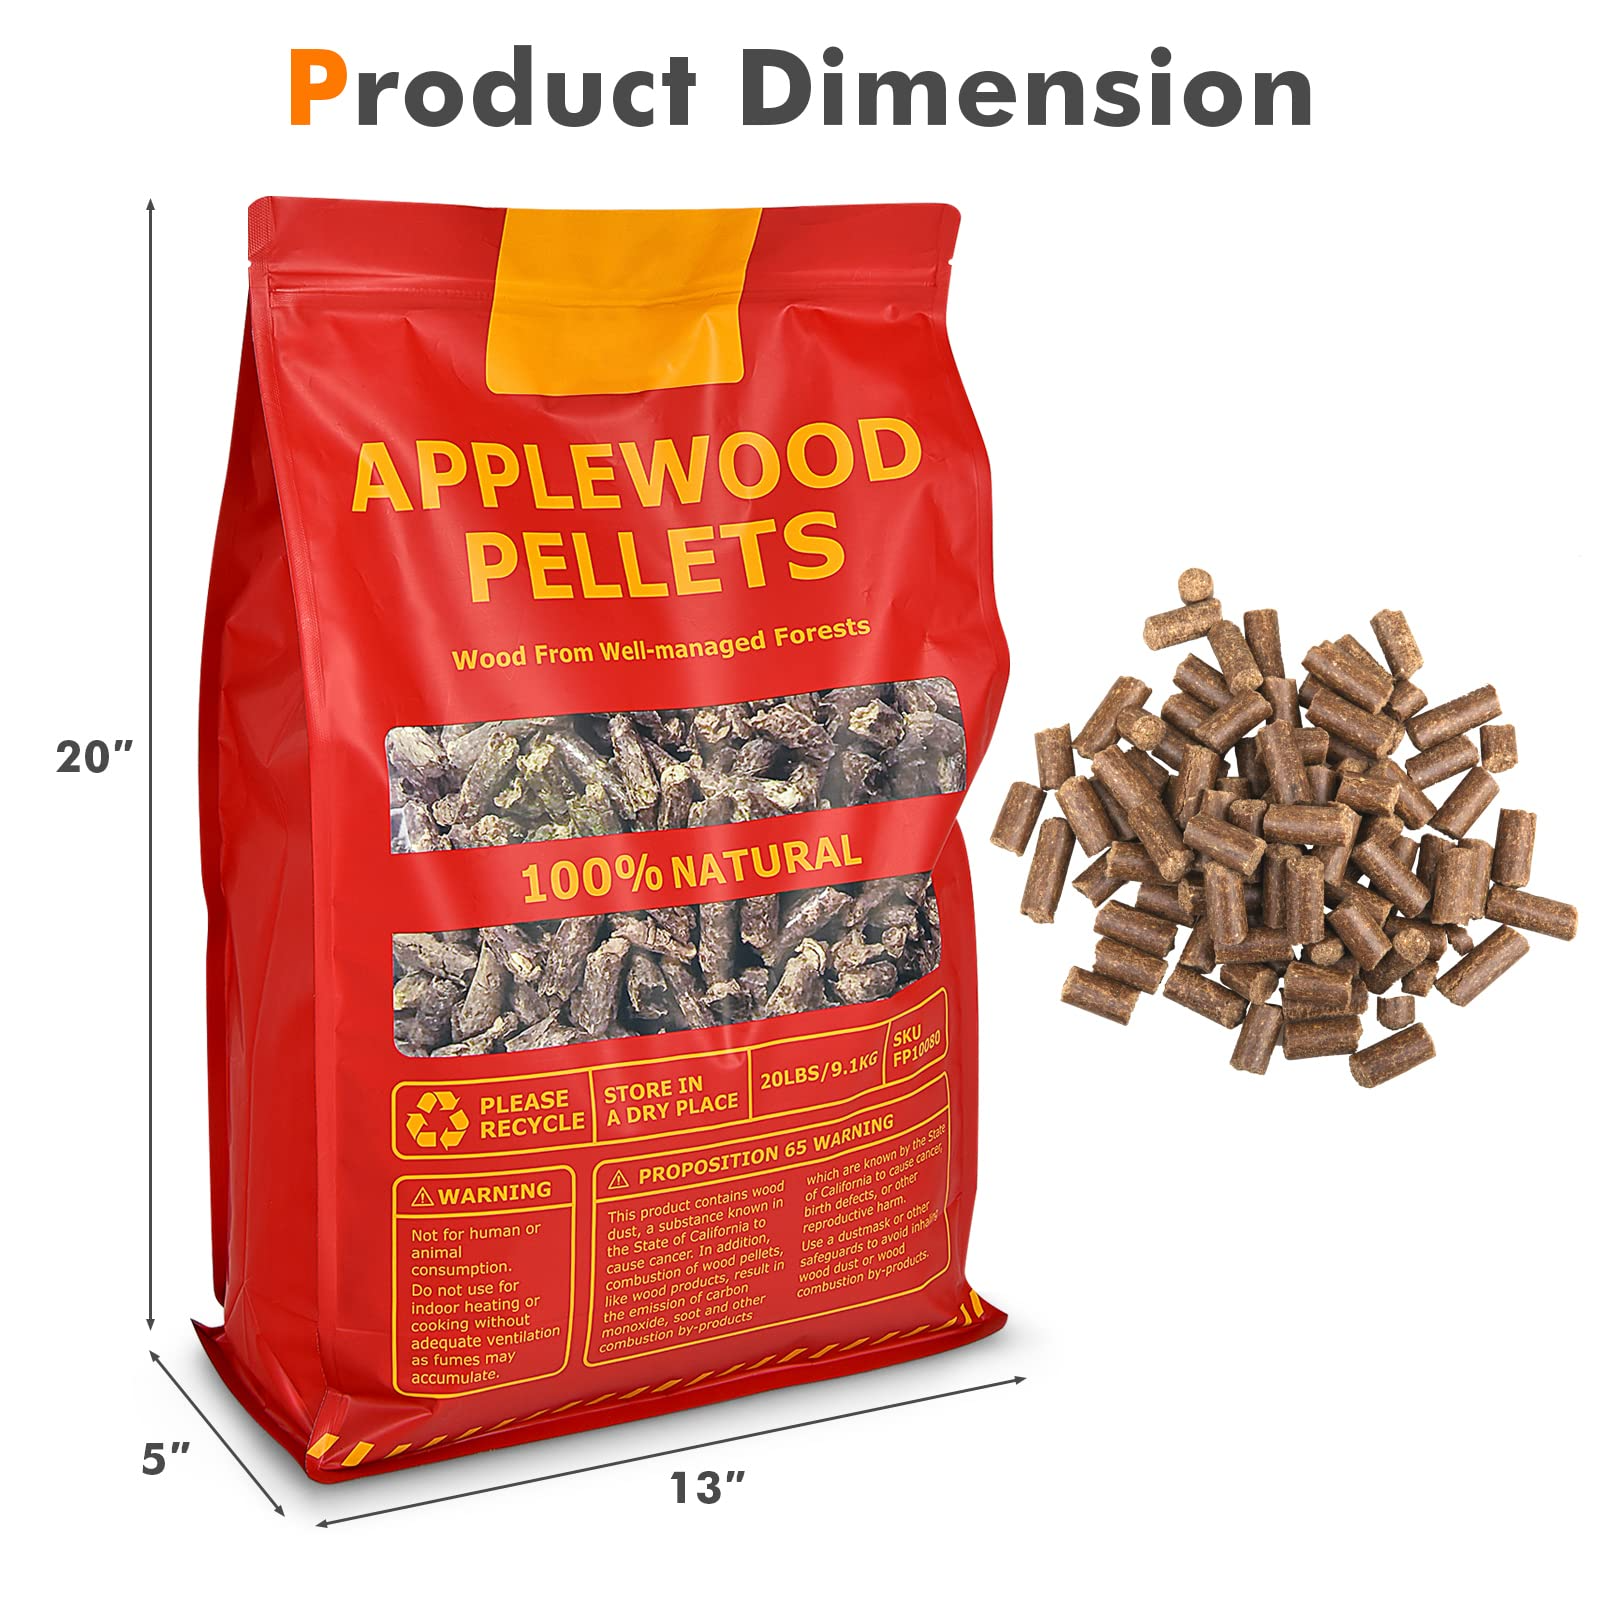 All Natural Hardwood Pellets with Fruity Flavour for Grilling Smoking Bake Roast BBQ